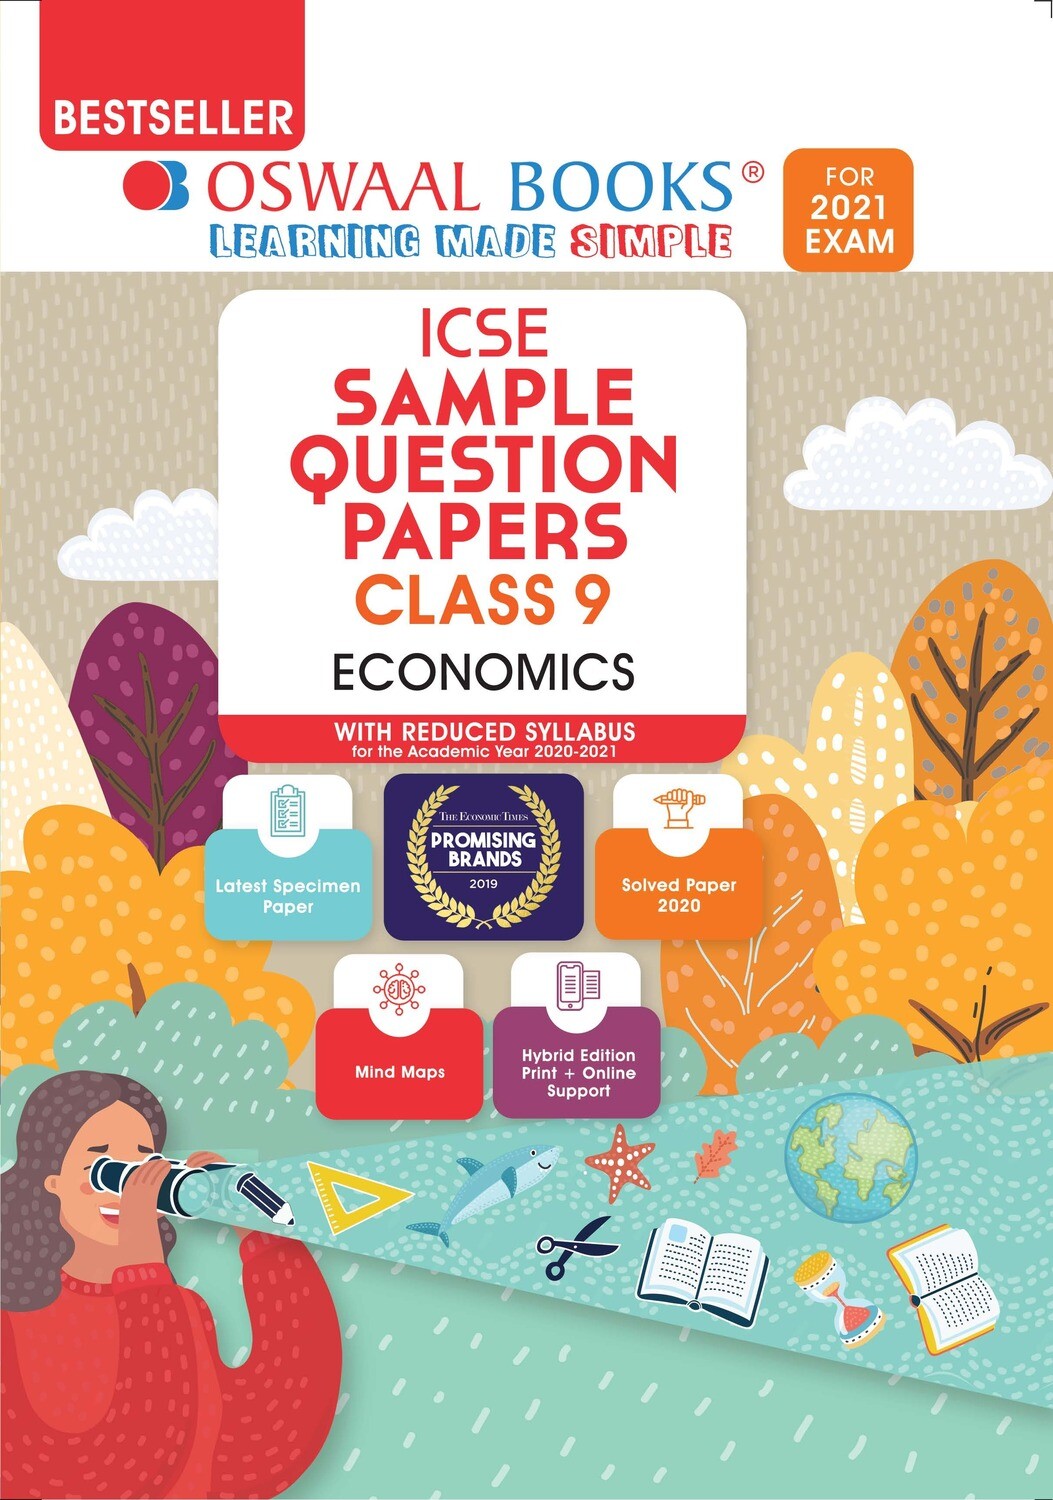 Buy e-book: Oswaal ICSE Sample Question Papers Class 9 Economics (Reduced Syllabus for 2021 Exam): 9789354232688